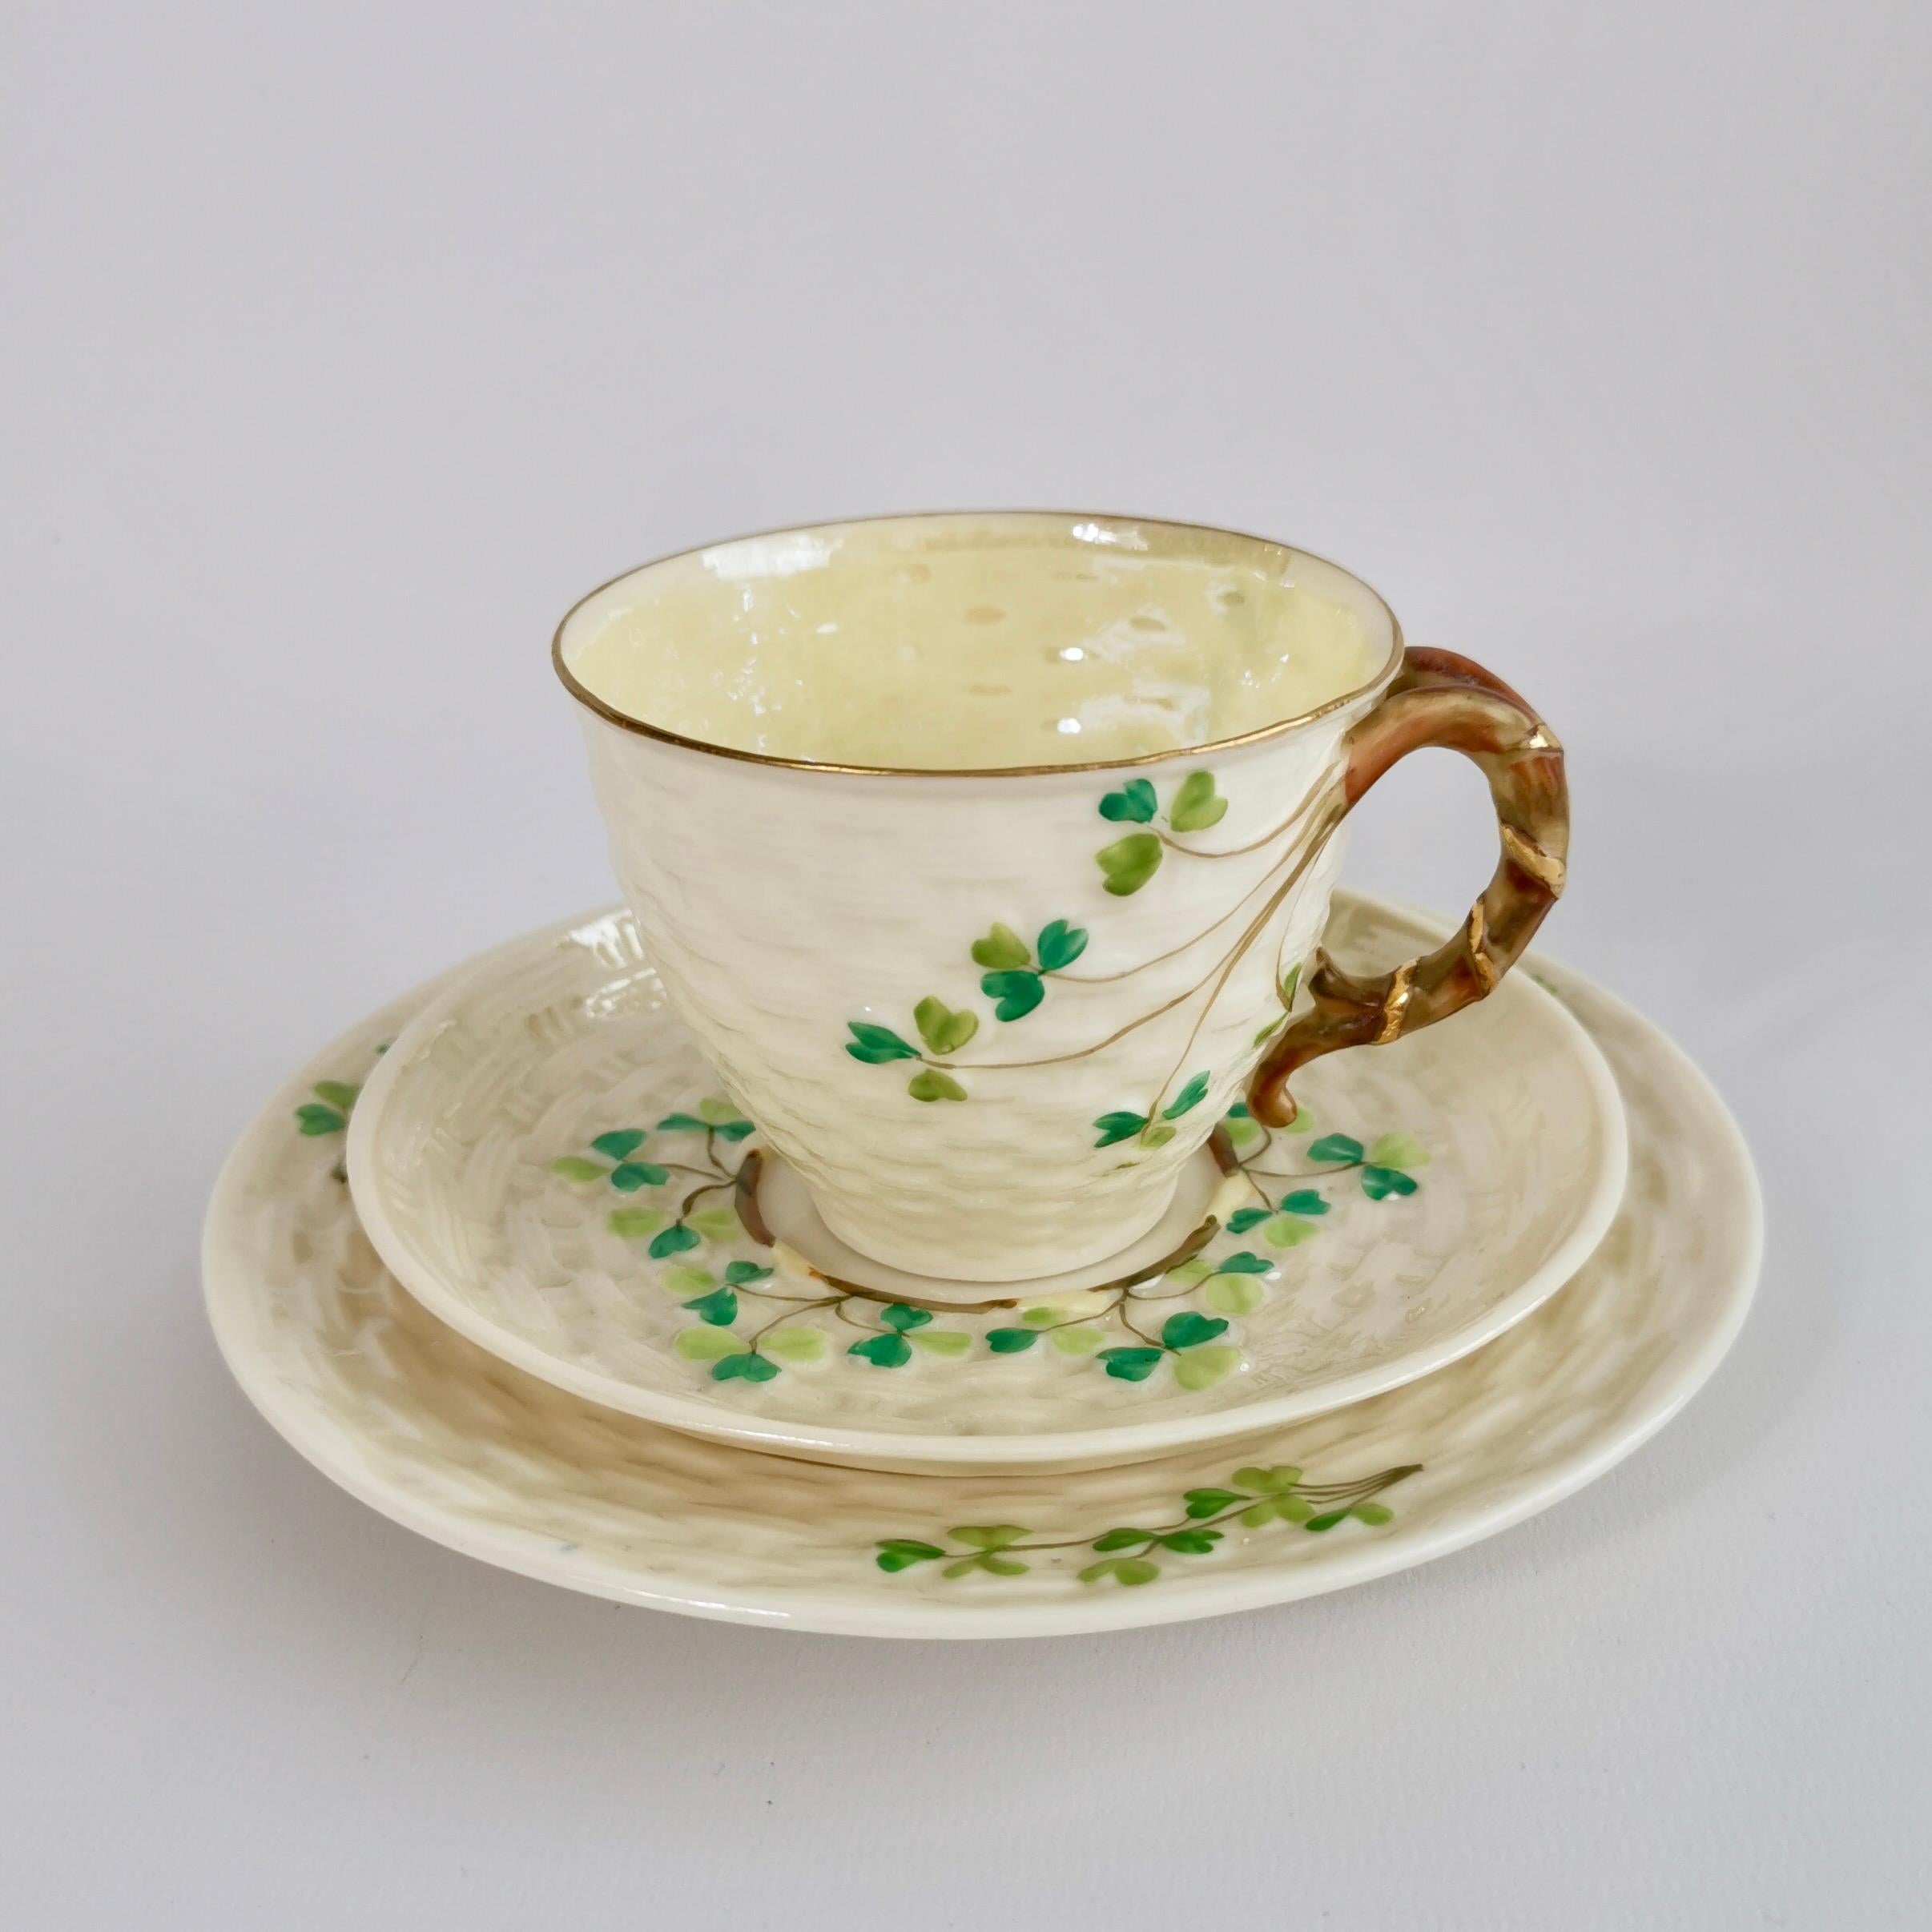 This is a very charming coffee cup trio made by Belleek in the Shamrock design, consisting of a coffee cup, a saucer and a little cake plate. It has the 2nd Black Mark, which was used between 1891 and 1926. Given the quality of the porcelain we